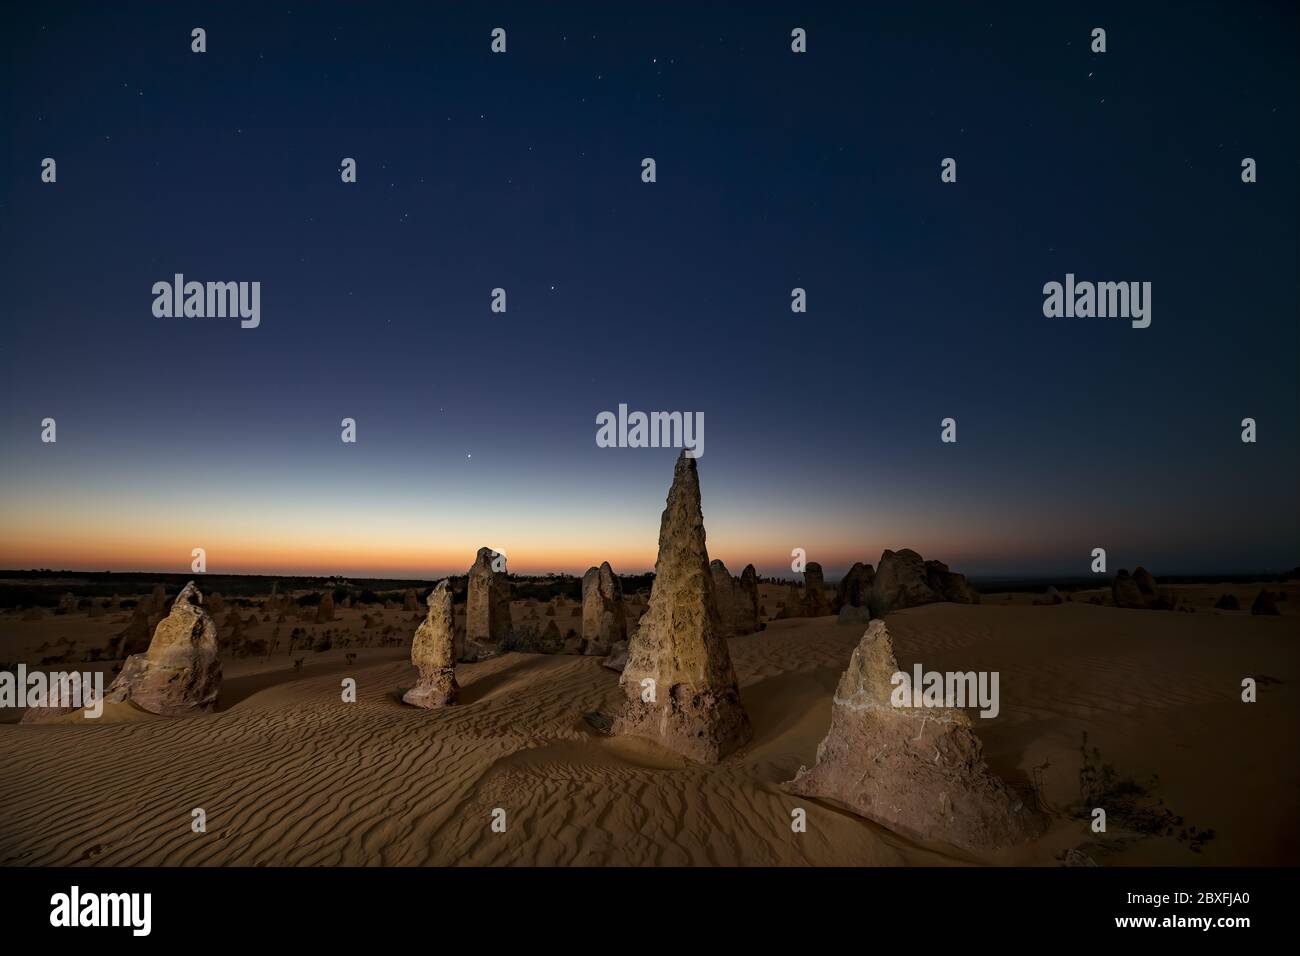 Limestone stacks light painted at night in the Nambung national park, Western Australia Stock Photo